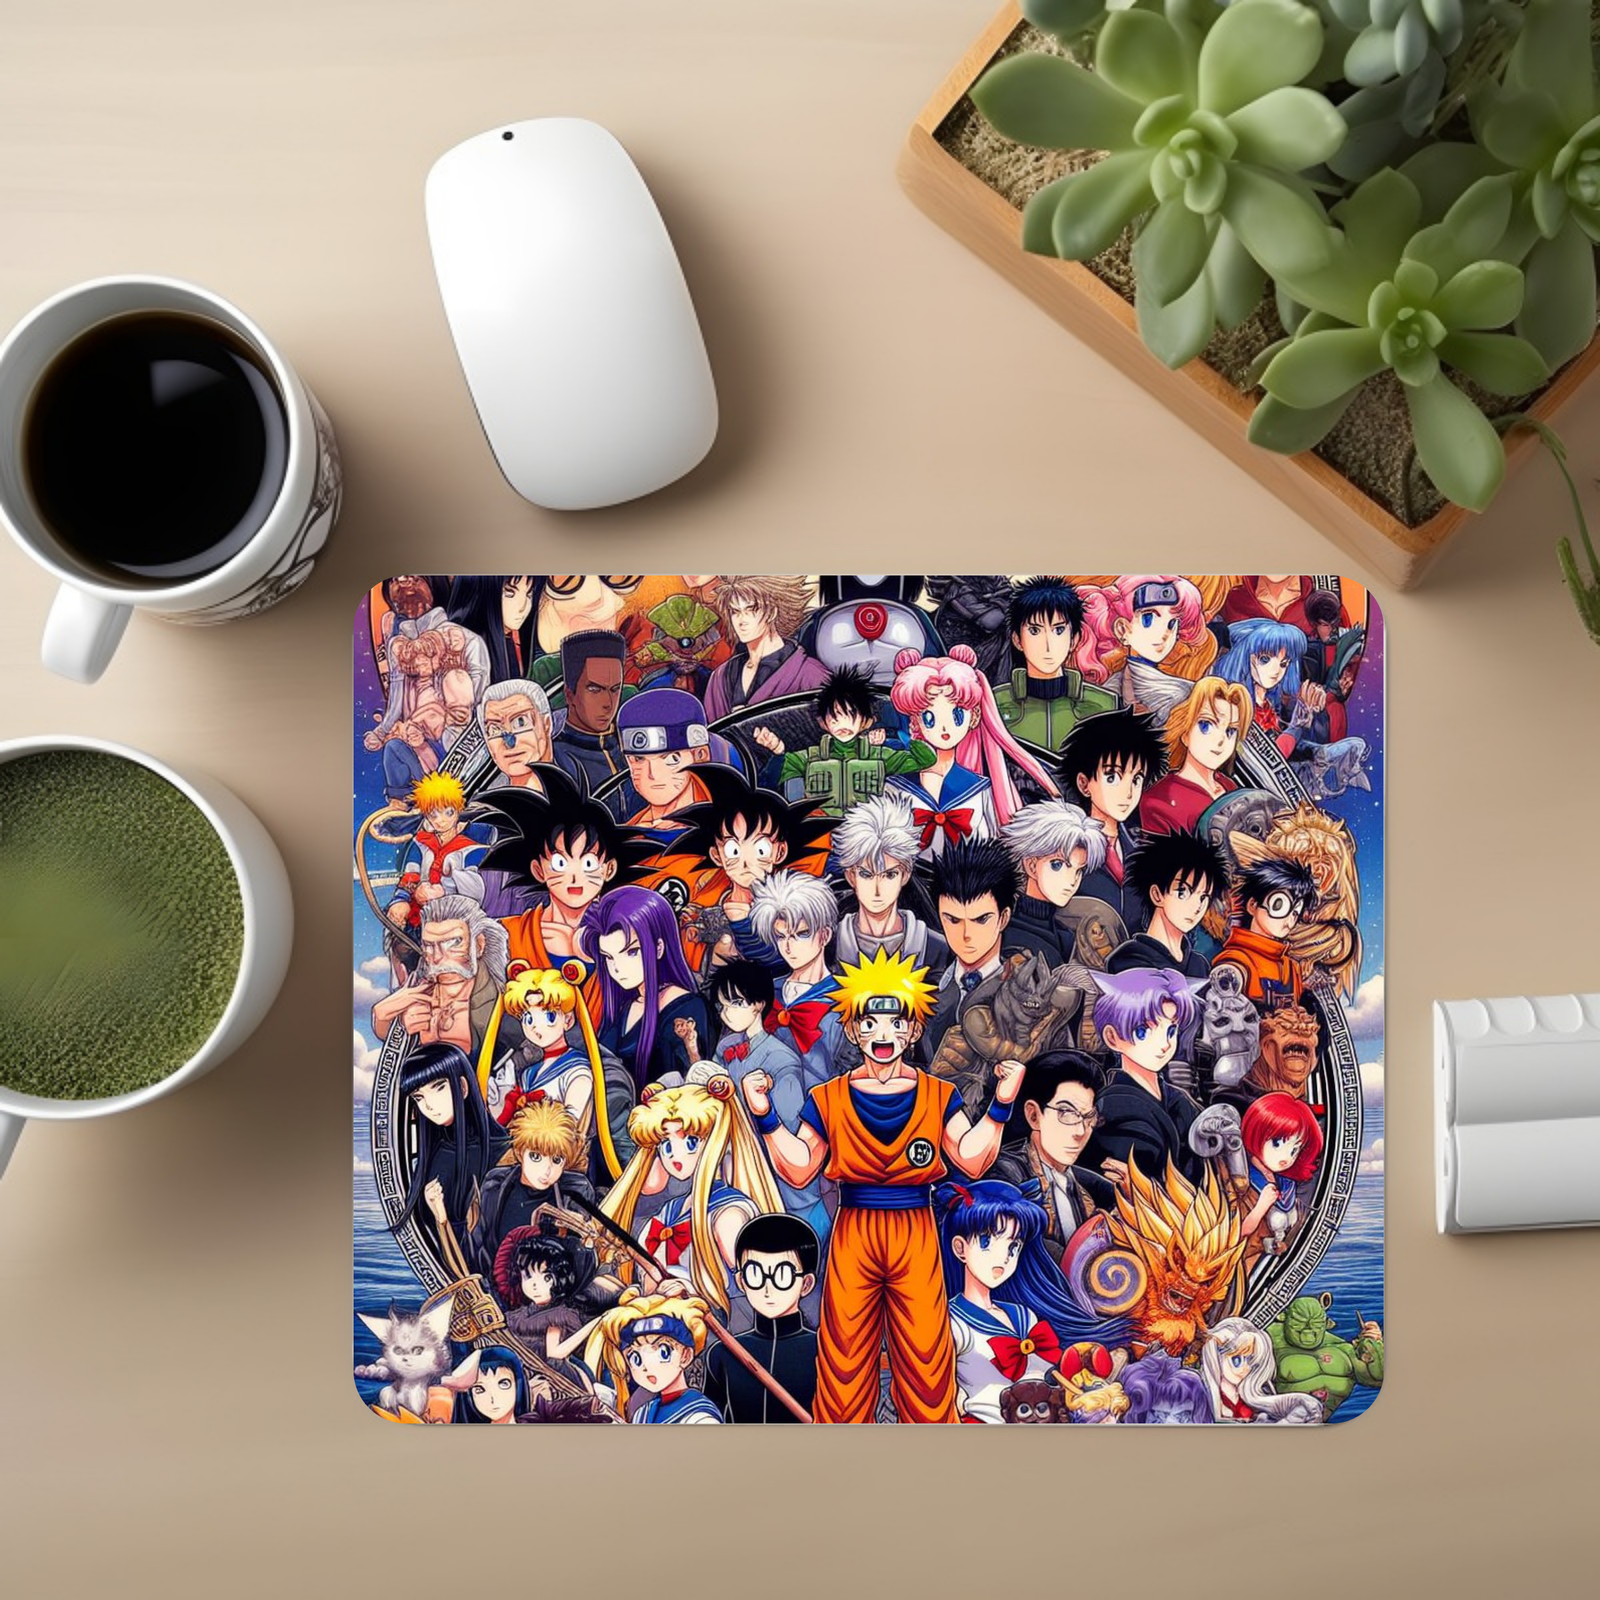 Amazon.com: Godnestoris Computer Gaming Mouse Pad,Anime Mouse pad,Anime  Girl Gaming mousepads, Anime Girl Mouse Pad 3D with Gel Wrist Rest Support.  : Office Products